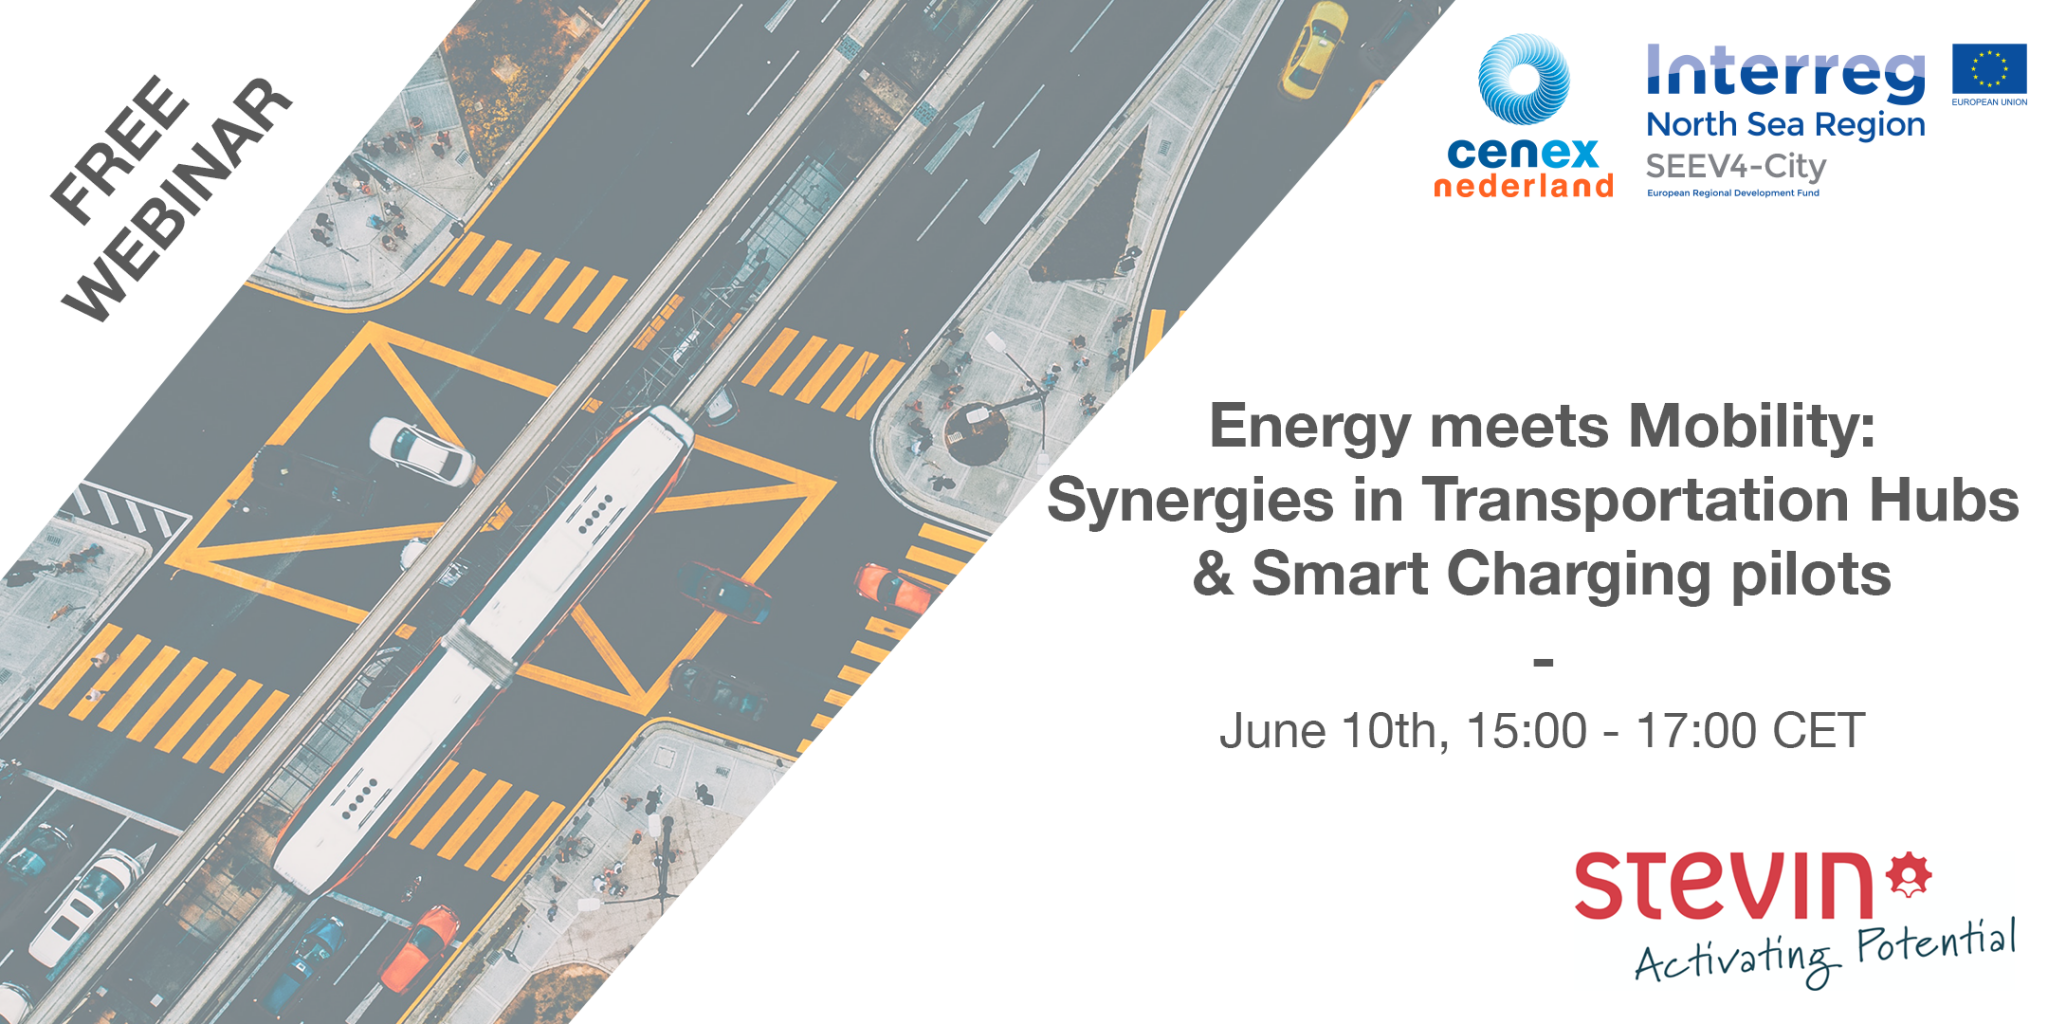 Energy meets Mobility: Synergies in Transportation Hubs & Smart Charging pilots